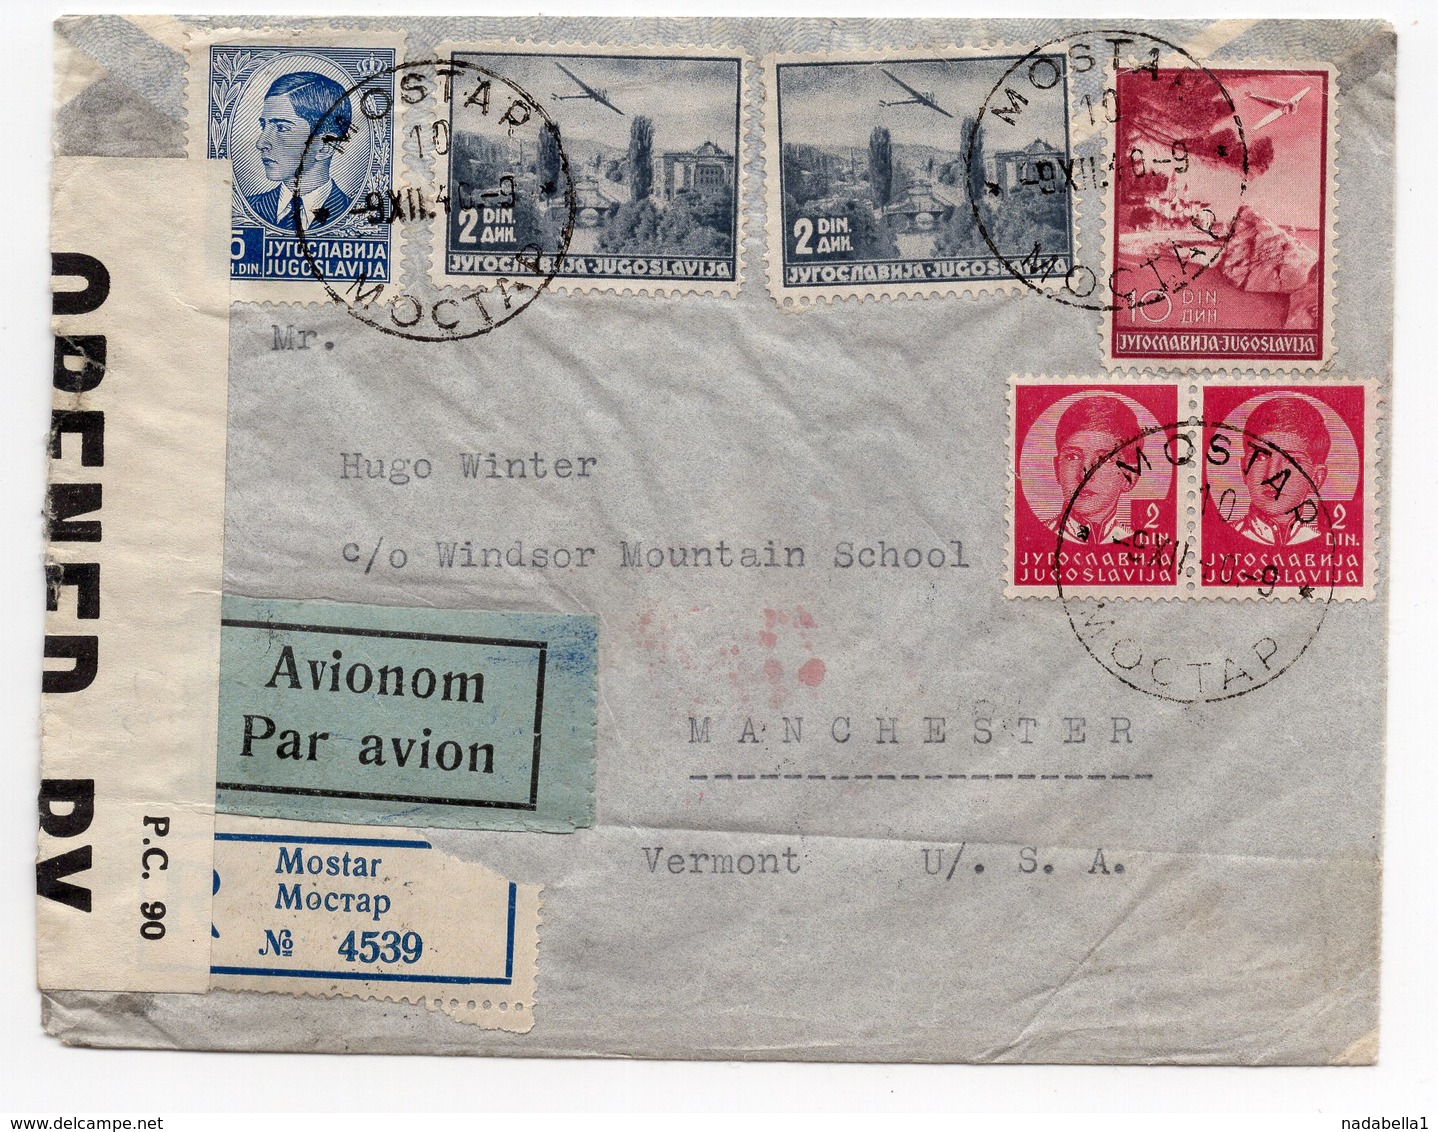 1940 YUGOSLAVIA, USA, BOSNIA, MOSTAR TO MANCHESTER - VERMONT, CENSORED BY USA, AIR MAIL REGISTERED, - Covers & Documents